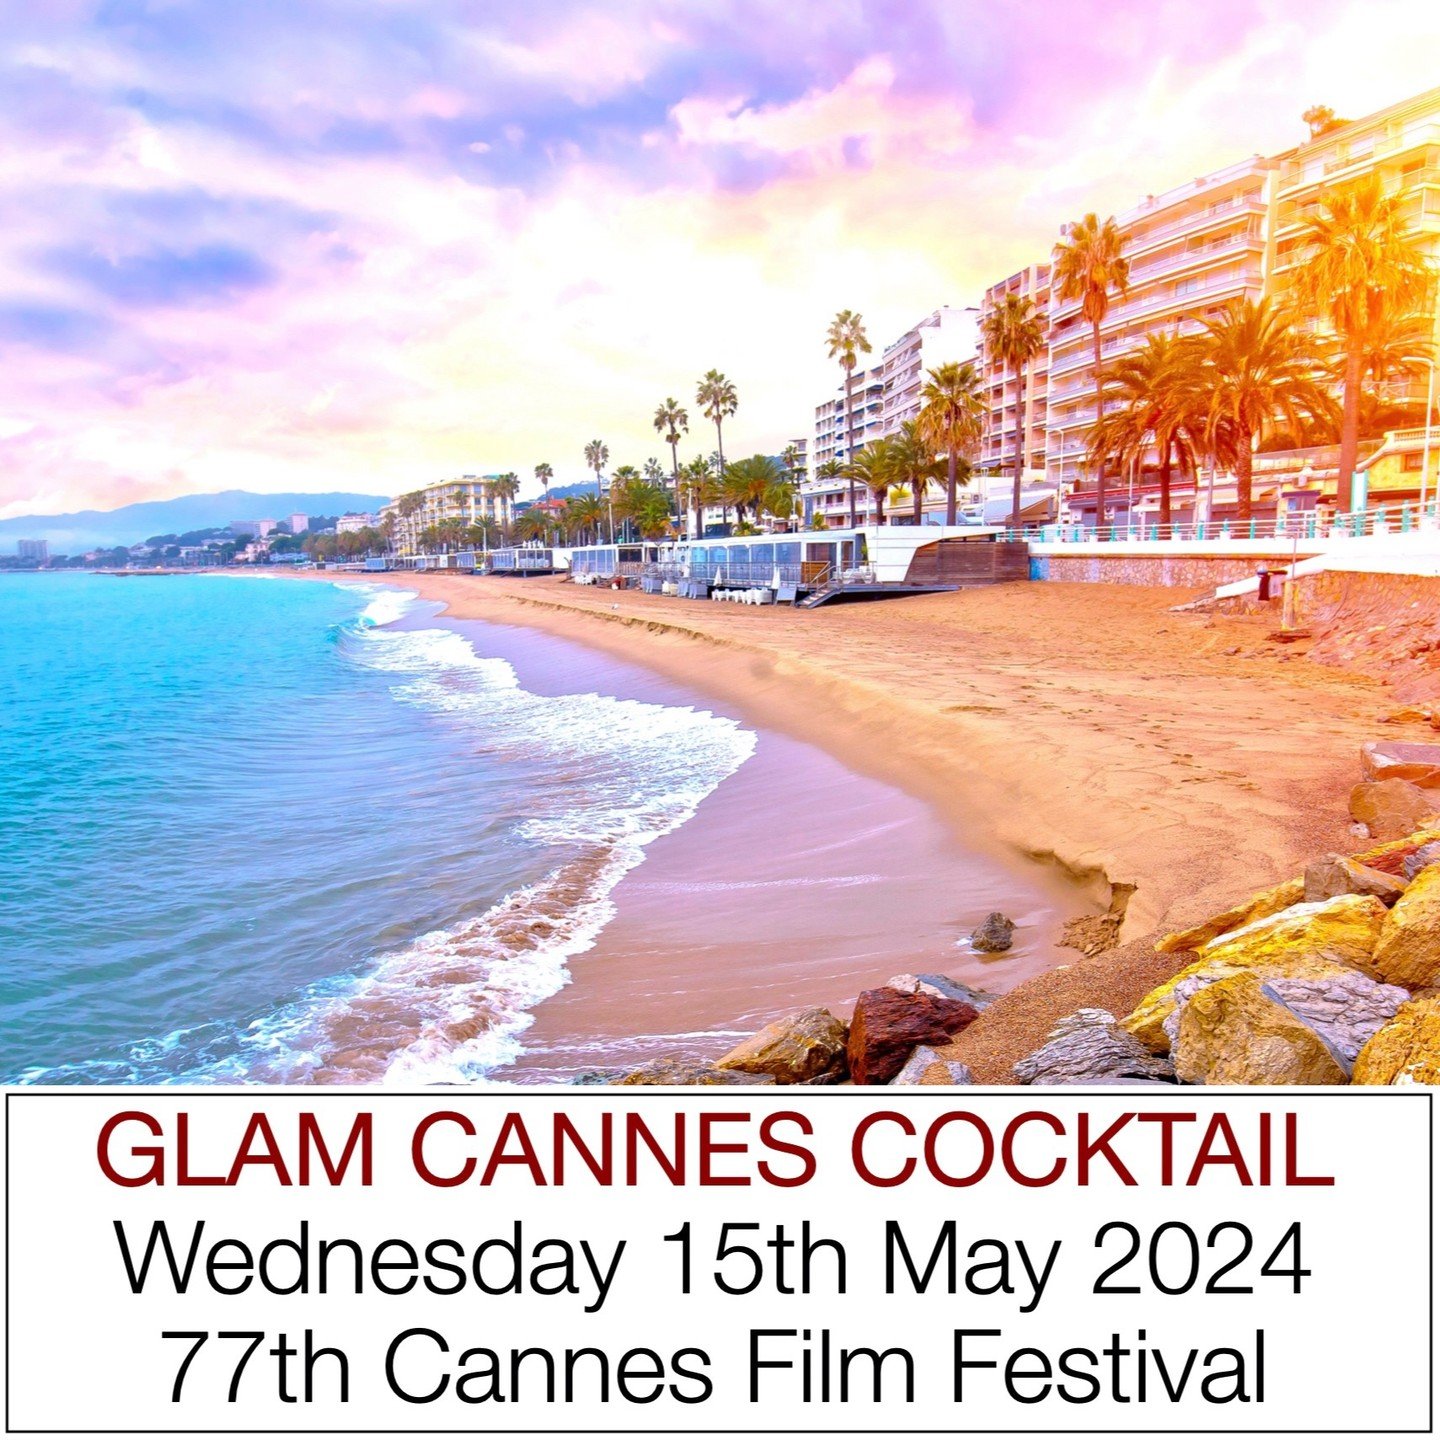 ⭐️ Don't Miss The GLAM Cannes Luxury Experience . Film Festival Cocktail . Wednesday 15th May 2024 @glam_cannes 

77th Cannes Film Festival Cocktail
12 Rue Des Belges, Cannes

Wednesday 15th May 2024
&euro;50 per person
6pm to 8pm

BOOK ONLINE at EVE